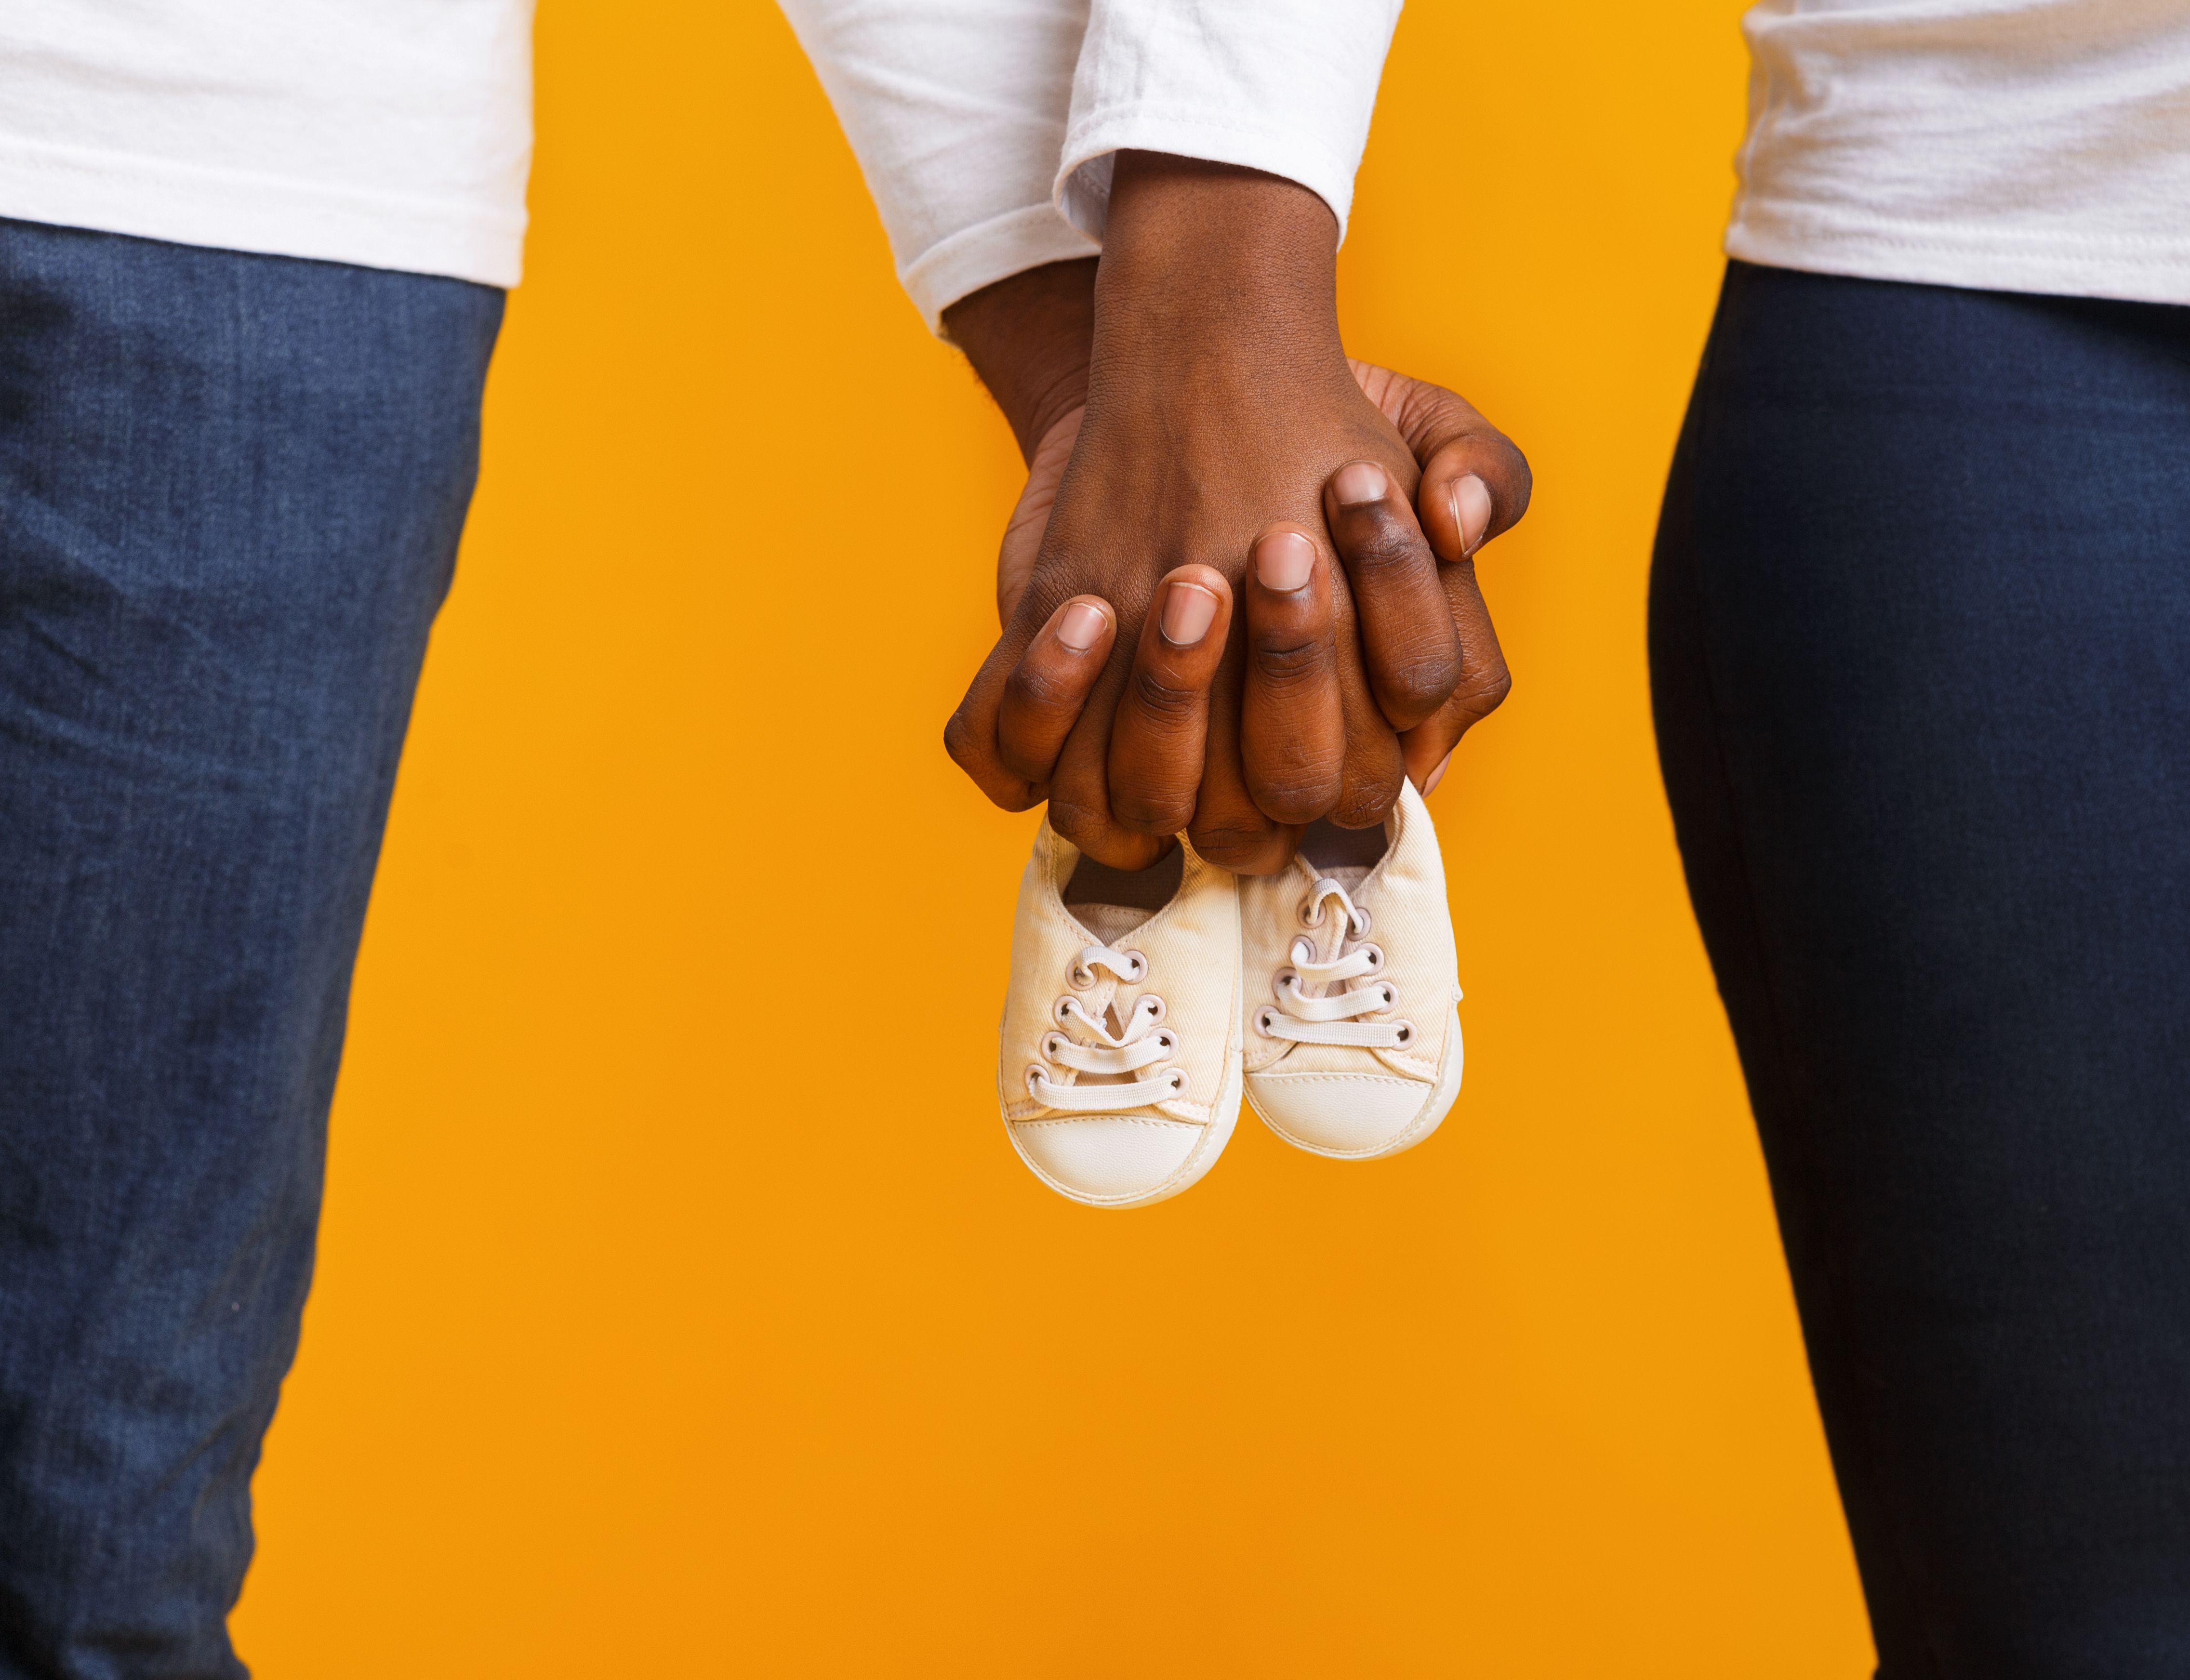 Black couple holding hands with baby shoes